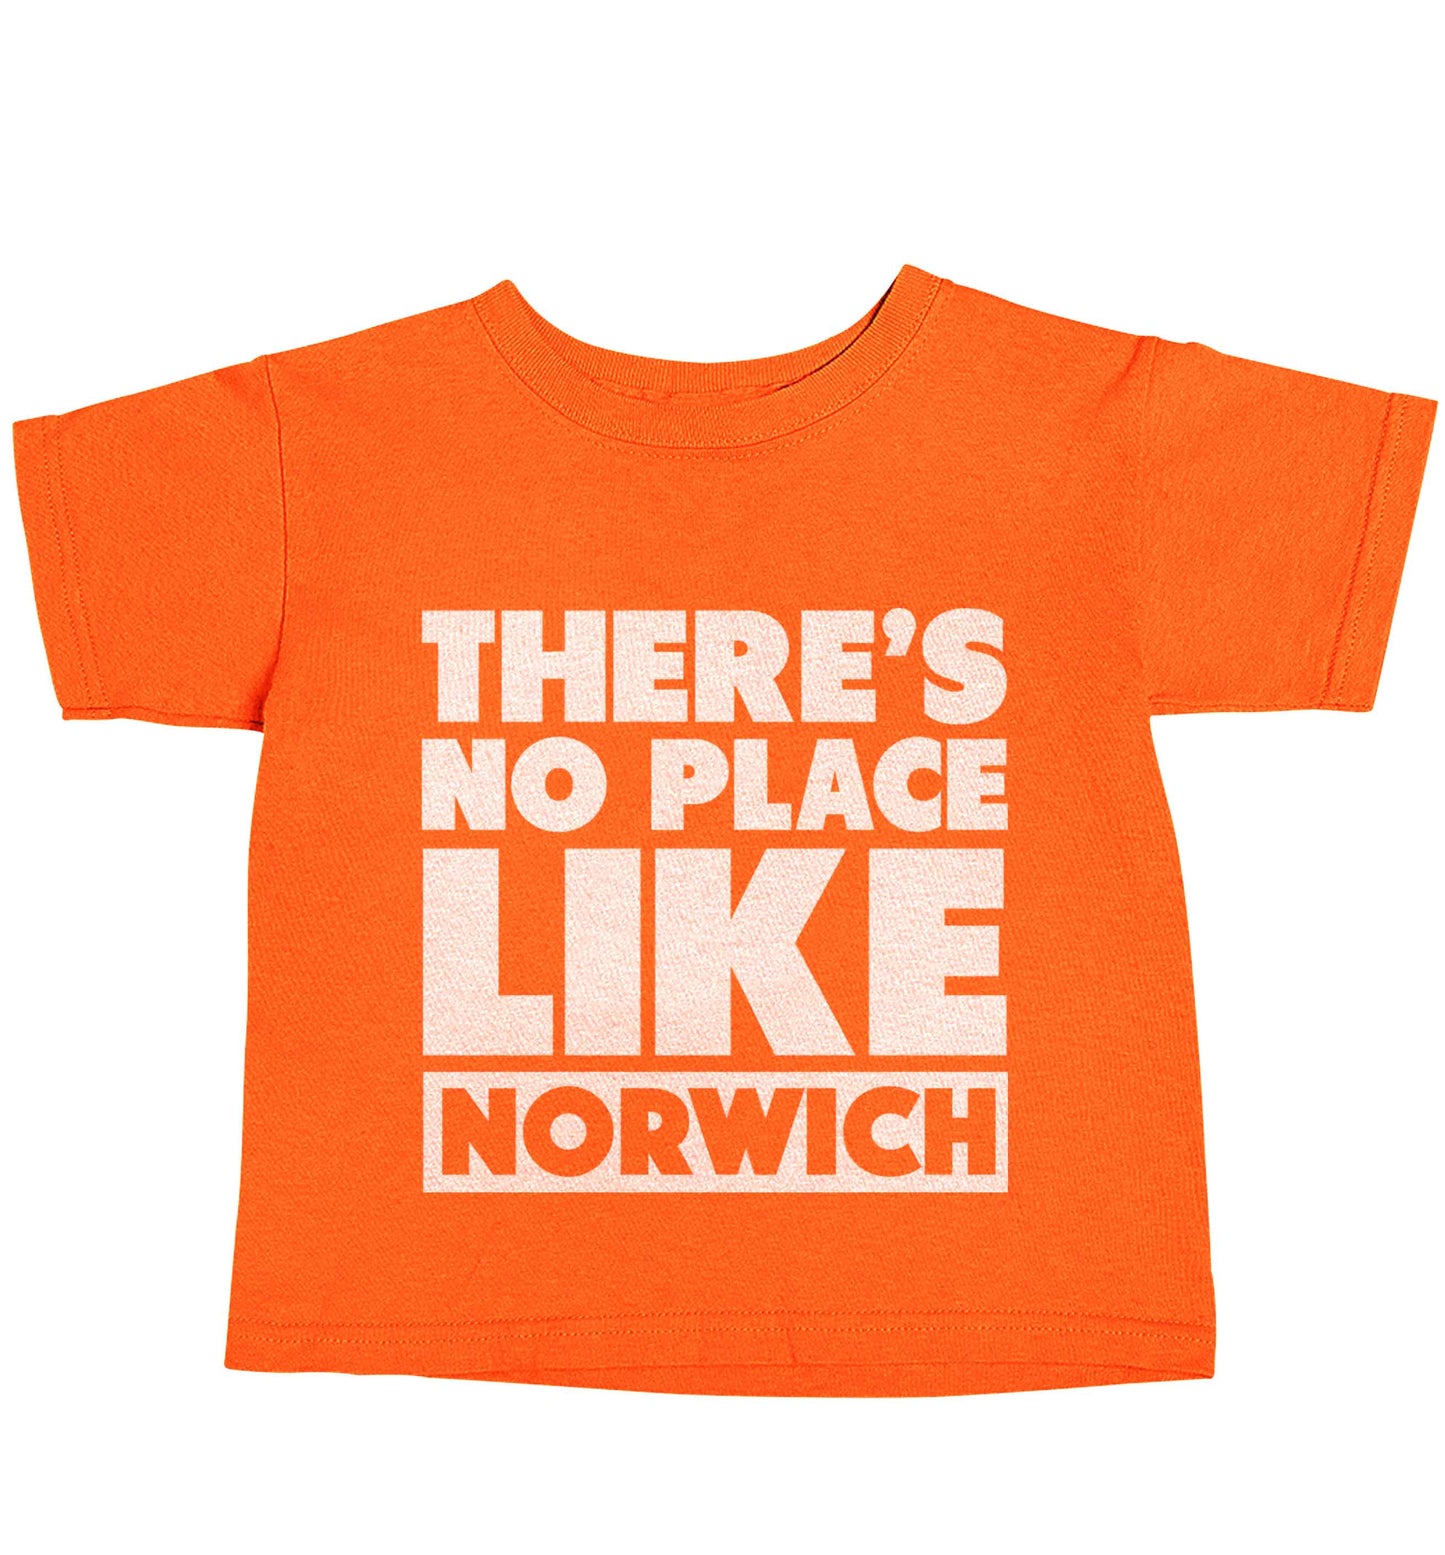 There's no place like Norwich orange baby toddler Tshirt 2 Years